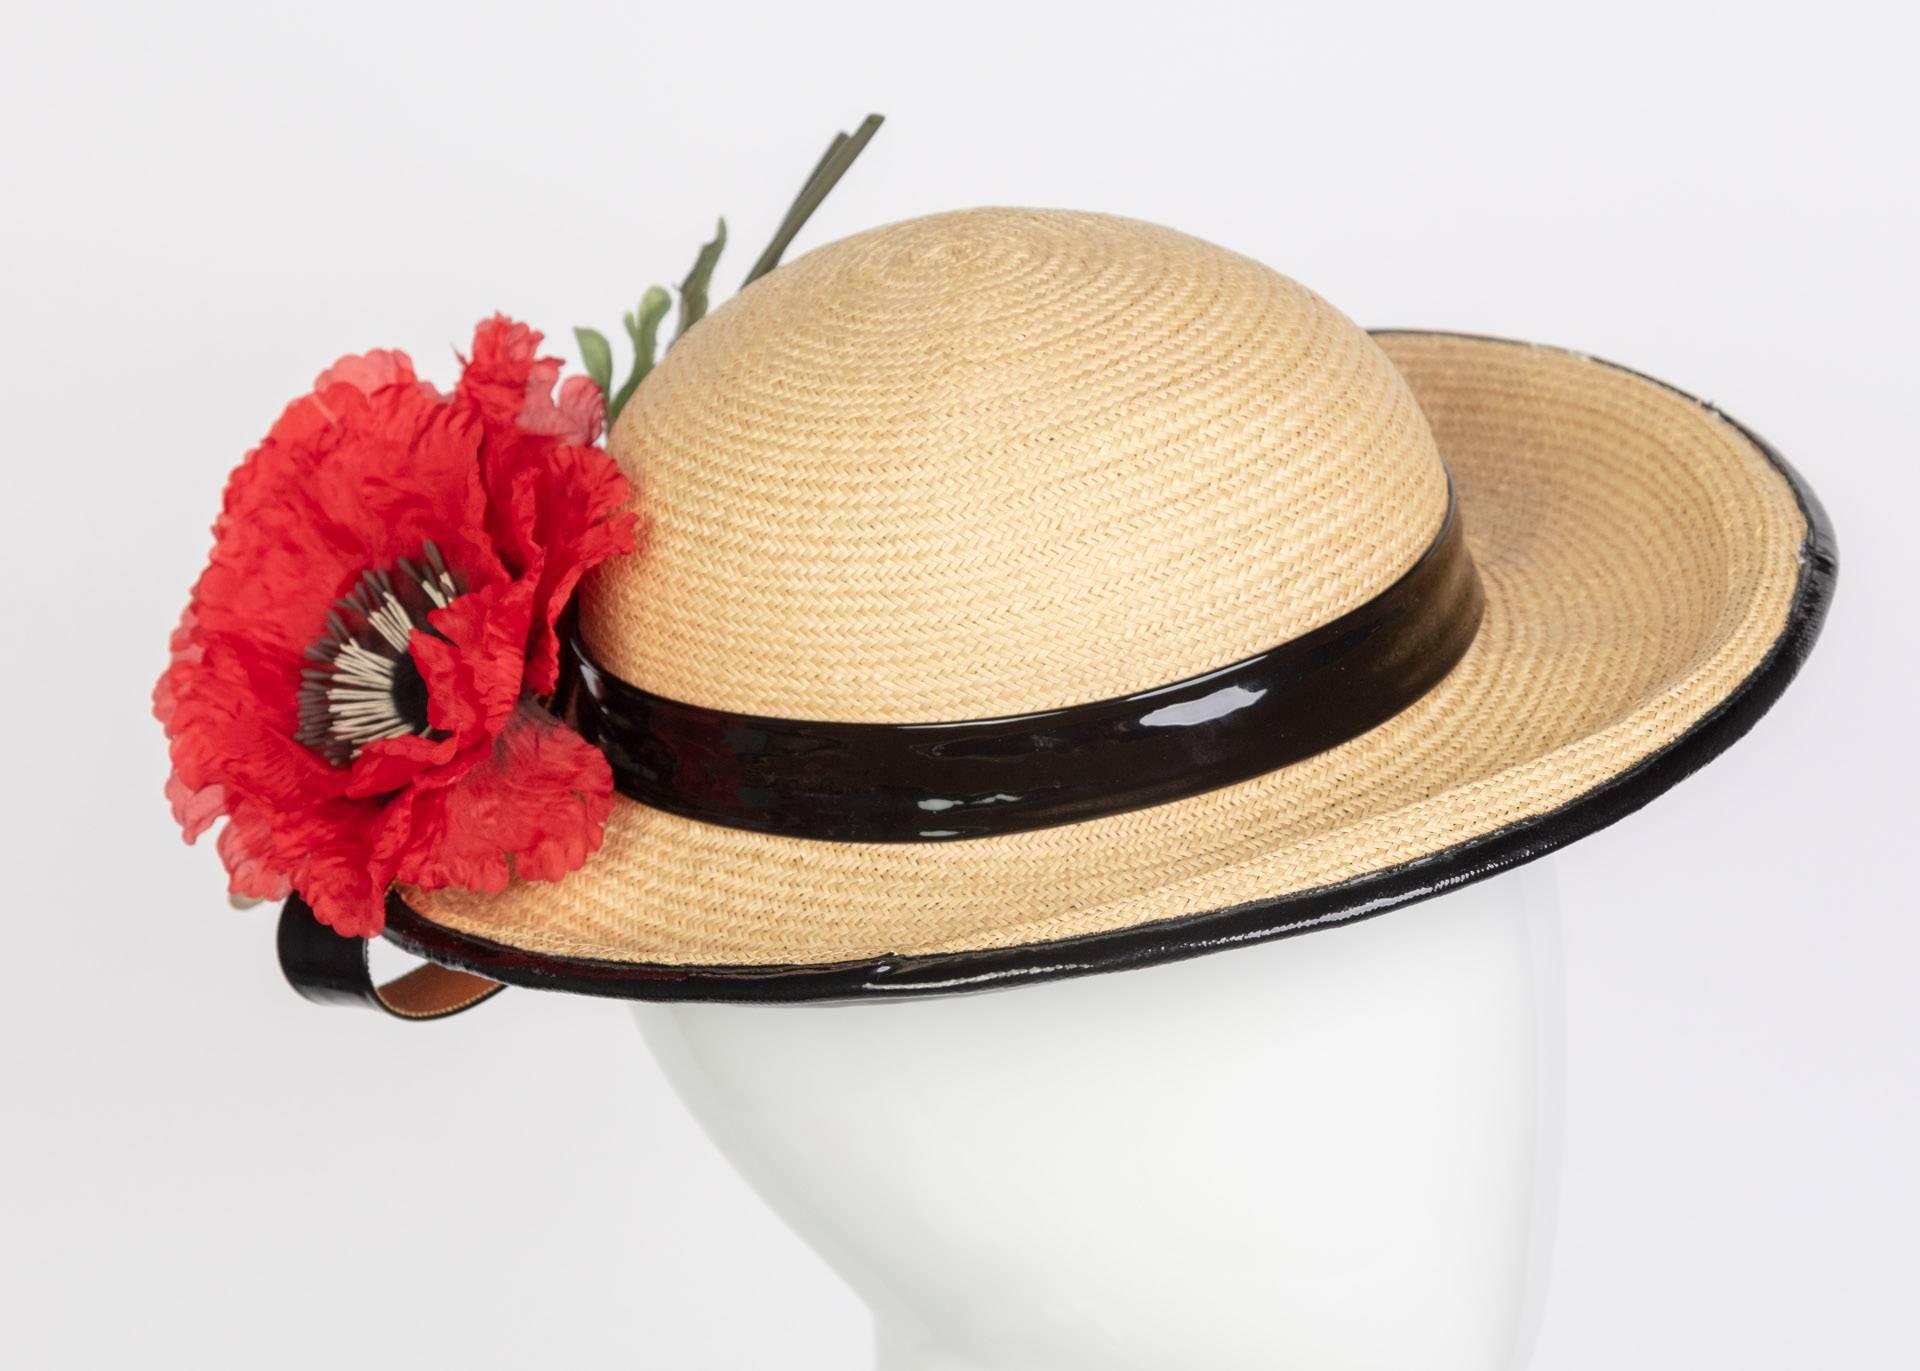 Men's Yves Saint Laurent Straw and Black Patent Leather Red Poppy Flower Hat, 1970s For Sale